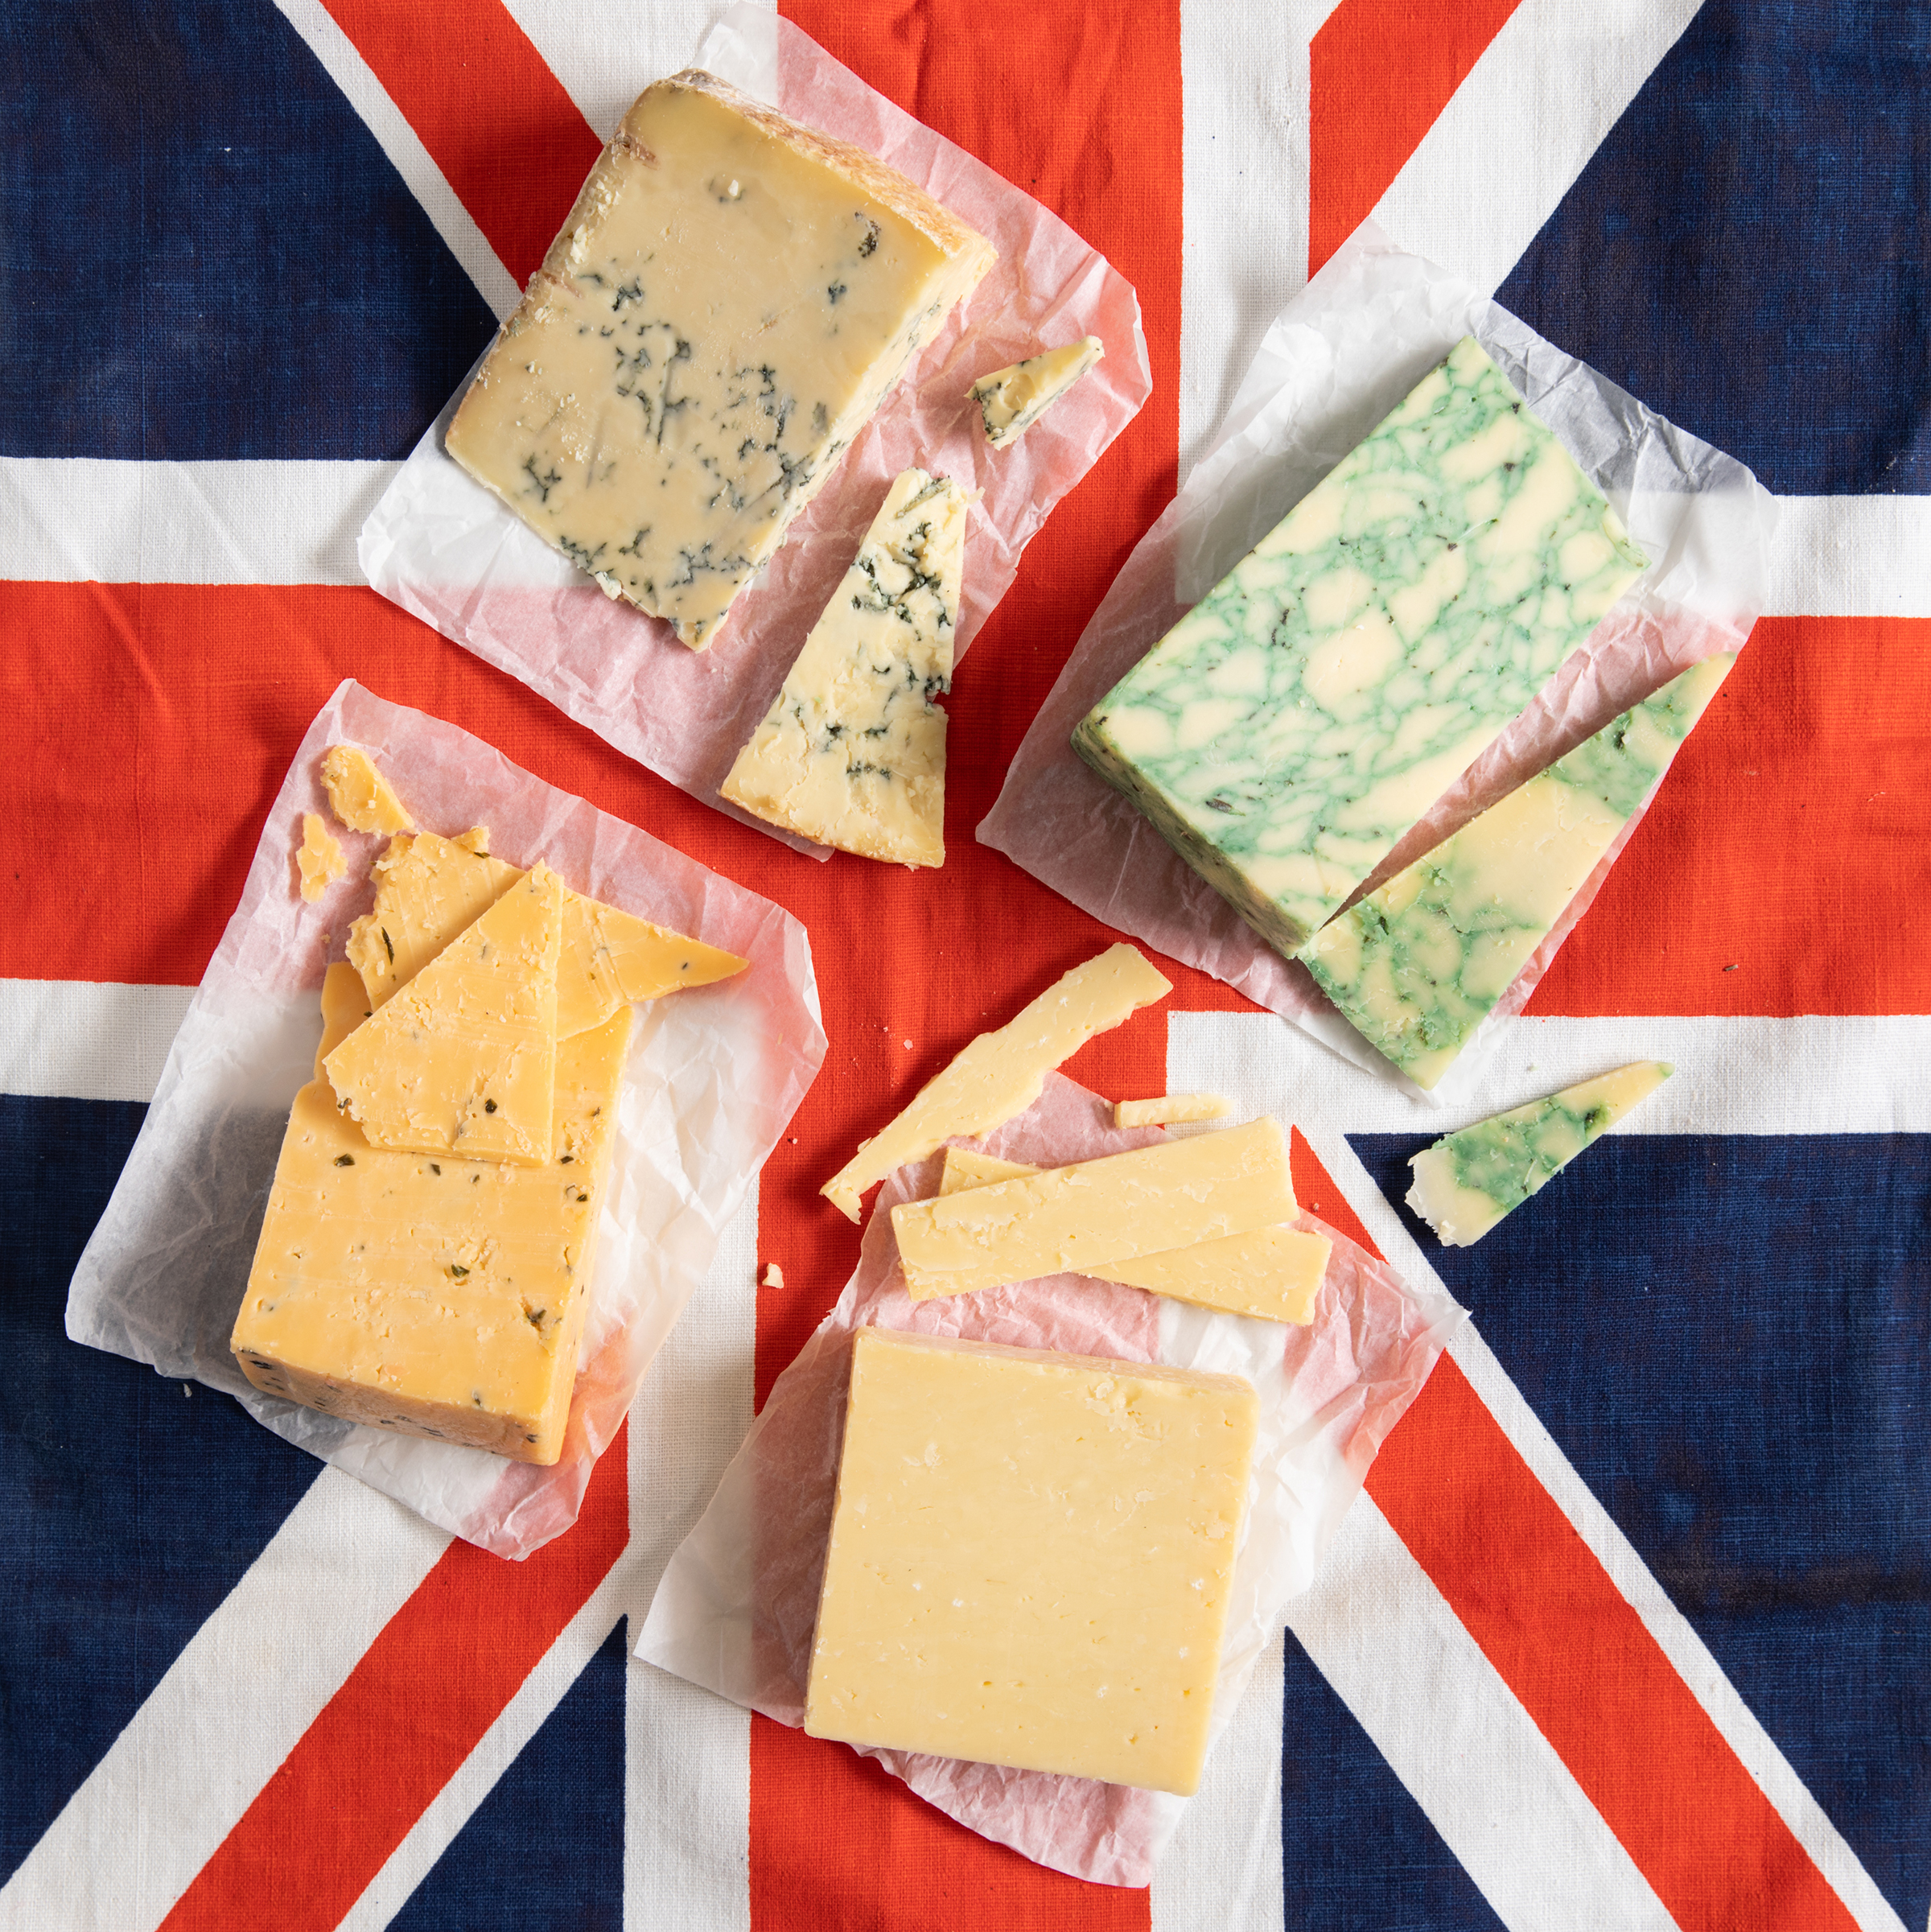 Cheese from the United Kingdom